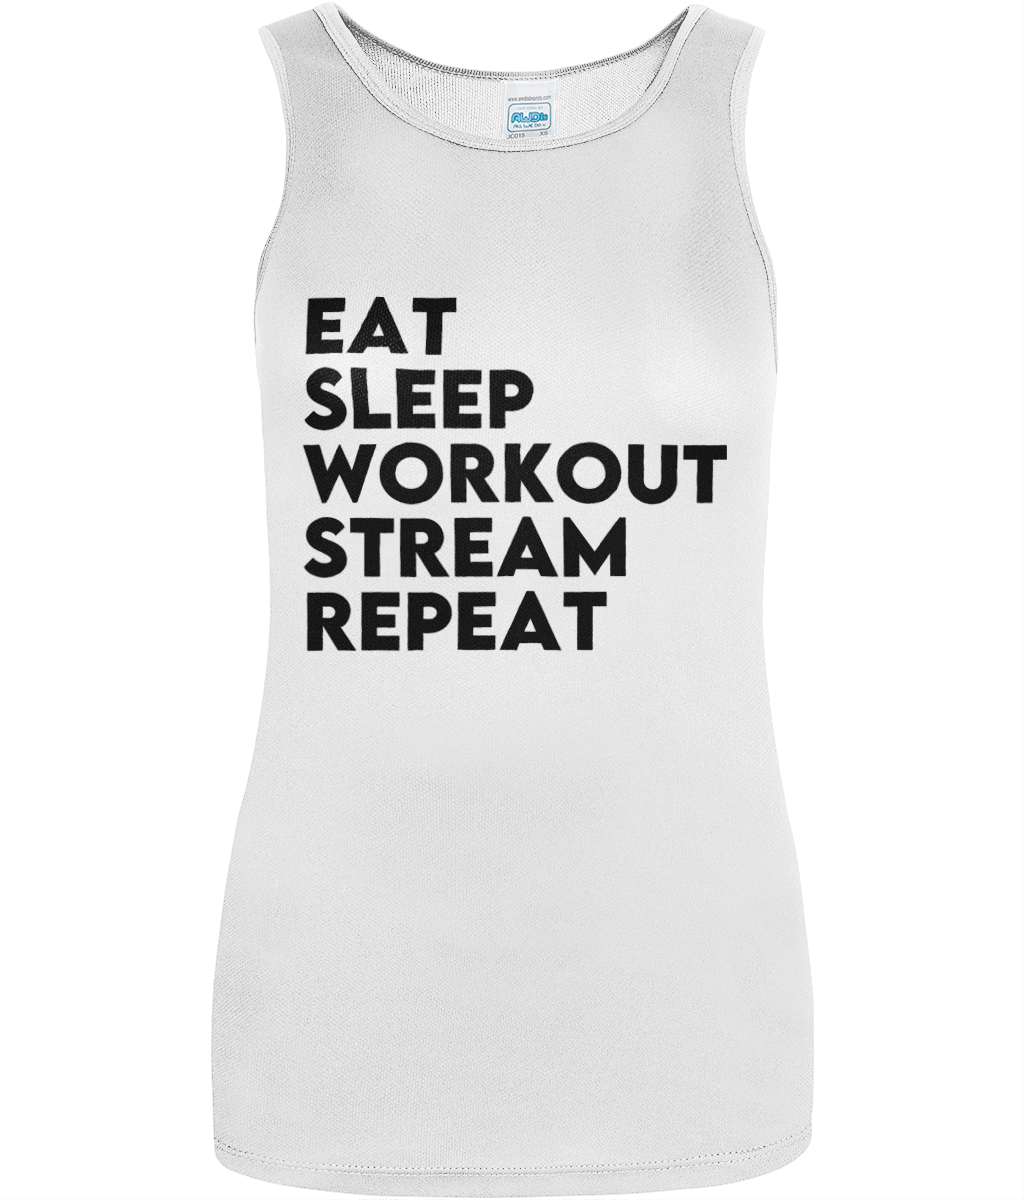 Eat Sleep Workout Stream Repeat Women's Cool Sports Vest